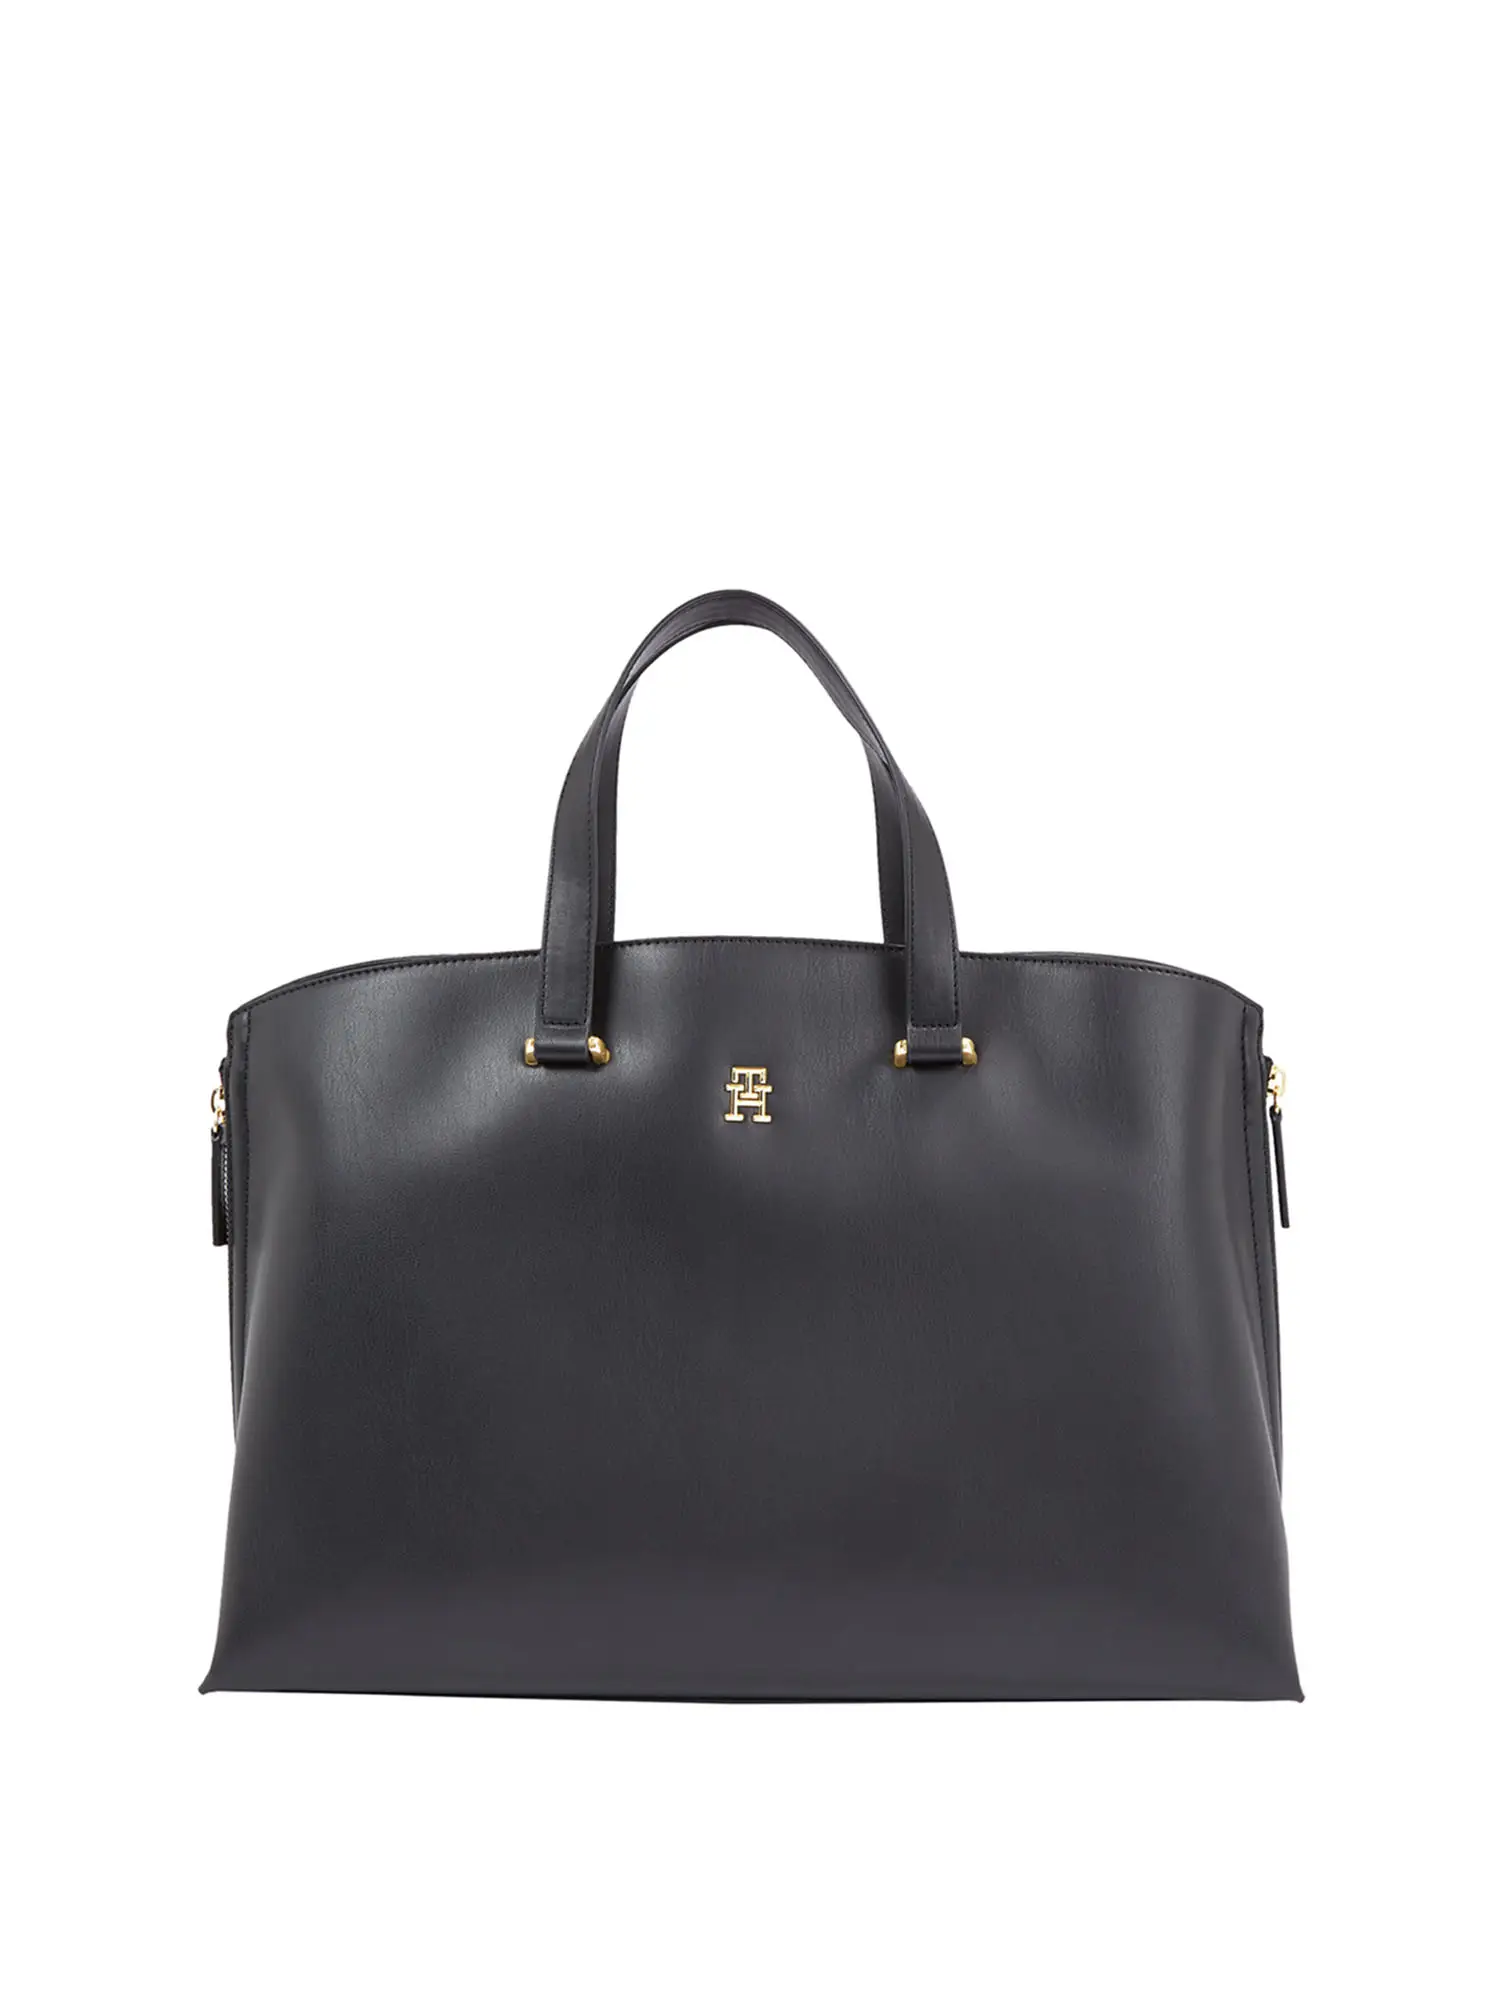 TOTE DONNA - TOMMY HILFIGER - AW0AW15967 - NERO, UNICA